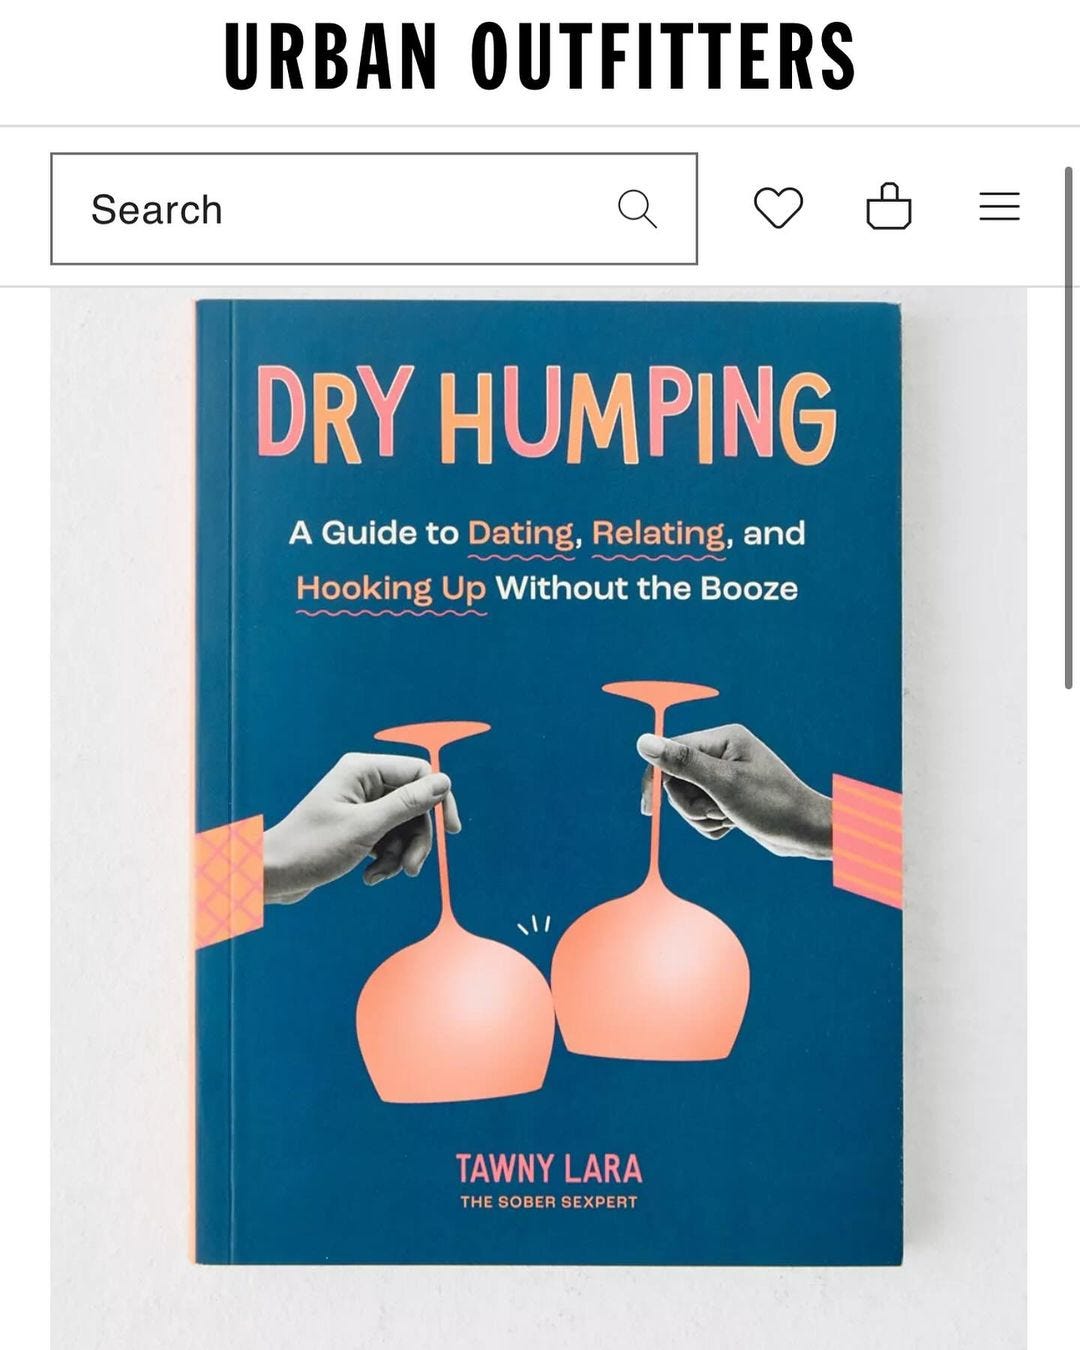 May be a graphic of text that says 'URBAN OUTFITTERS Search DRY HUMPING A Guide to Dating, Relating, and Hooking Up Without the Booze TAWNY LARA THES THE SOBER SEXPERT'